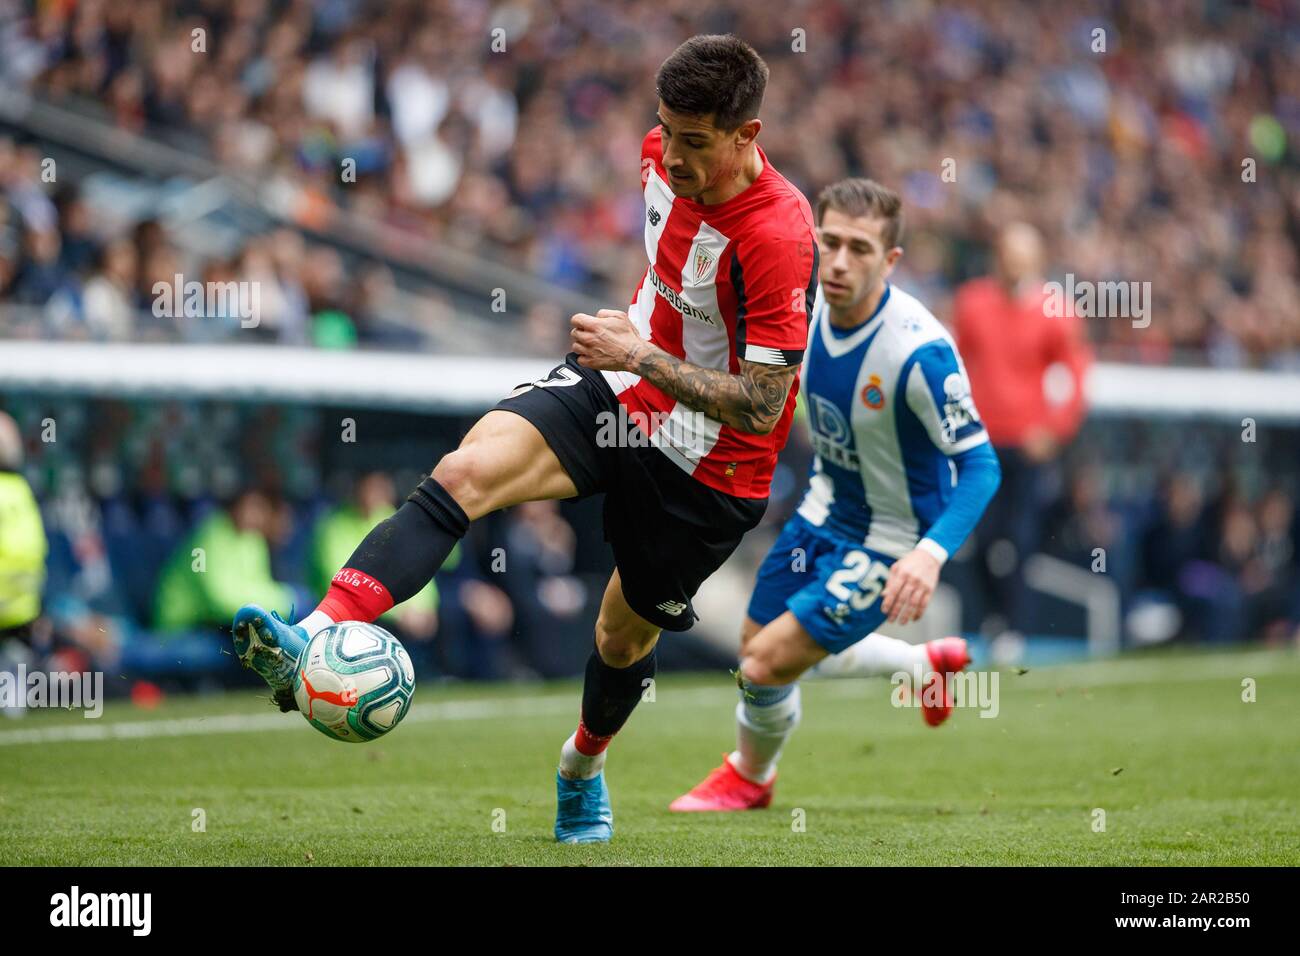 BARCELONA, SPAIN - JANUARY 24:.Yuri Berchiche of Athletic Club during the Liga match between RCD Espanyol and FC Barcelona at RCD Stadium on January 24, 2020 in Barcelona, Spain. (Photo by DAX/ESPA-Images) Stock Photo